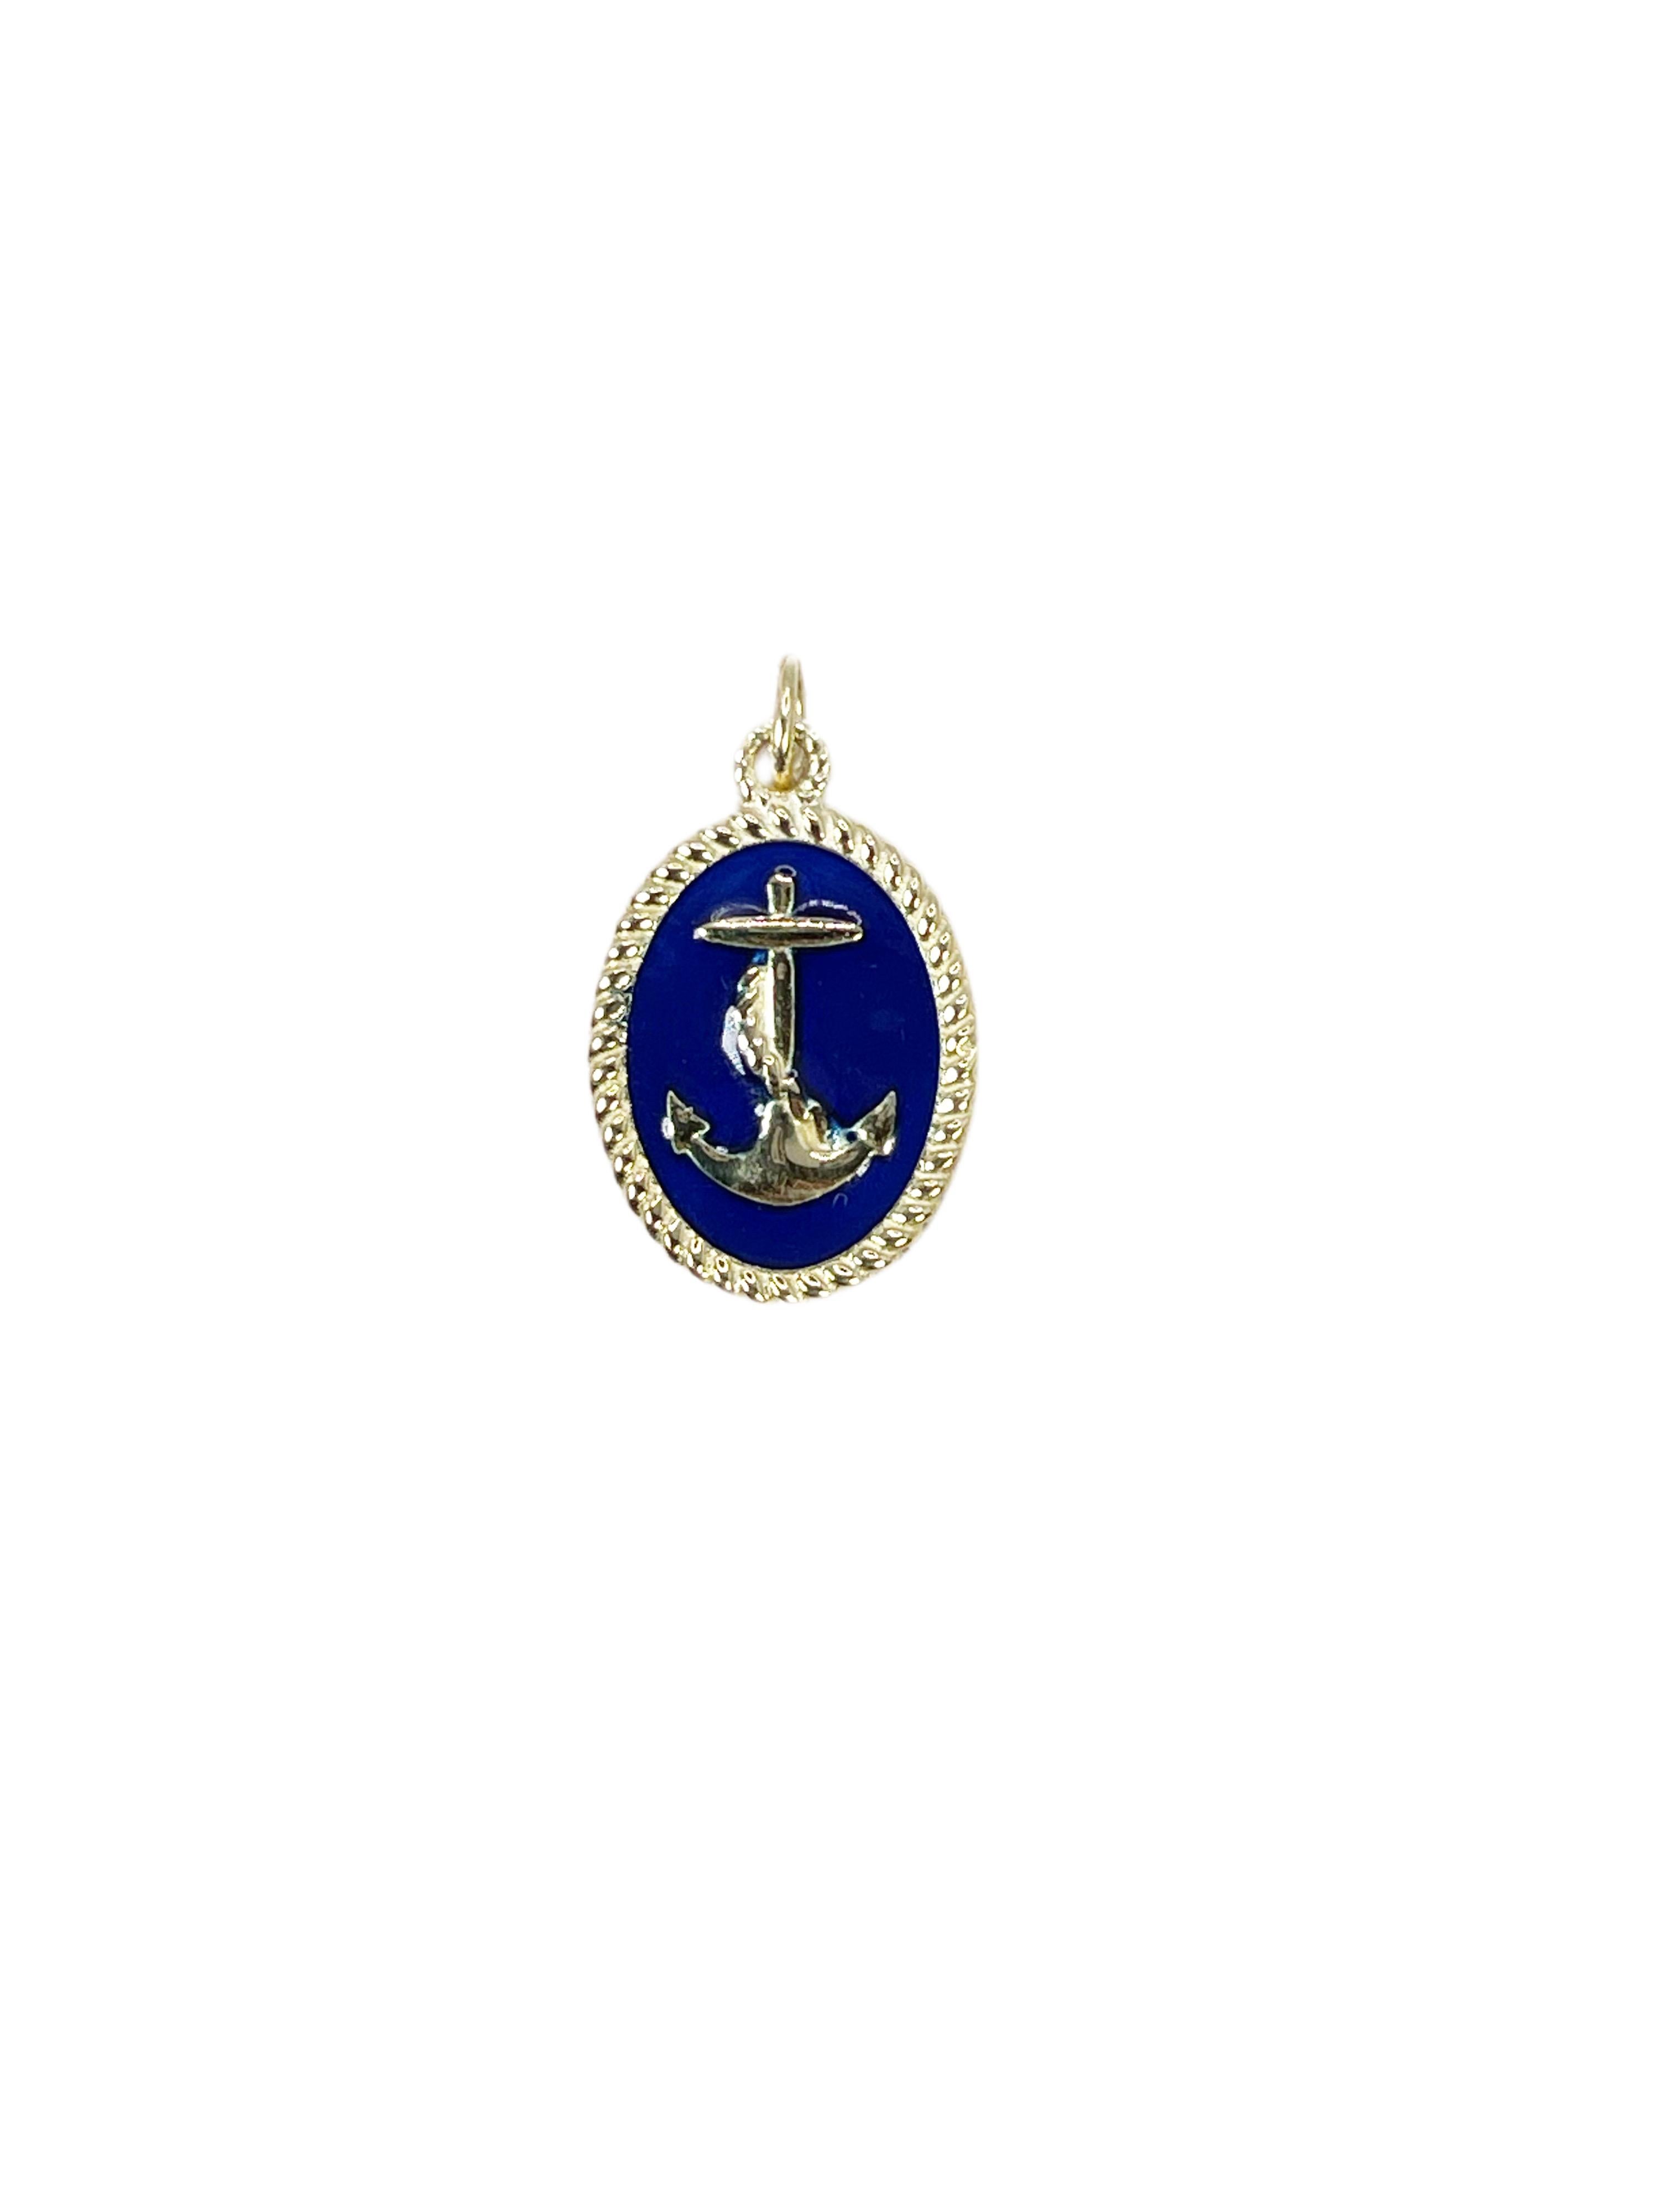 Anchorn Vitreous Enamel Pendant 18KT Yellow Gold Rare Sea Theme Pendant Necklace In New Condition For Sale In Jupiter, FL